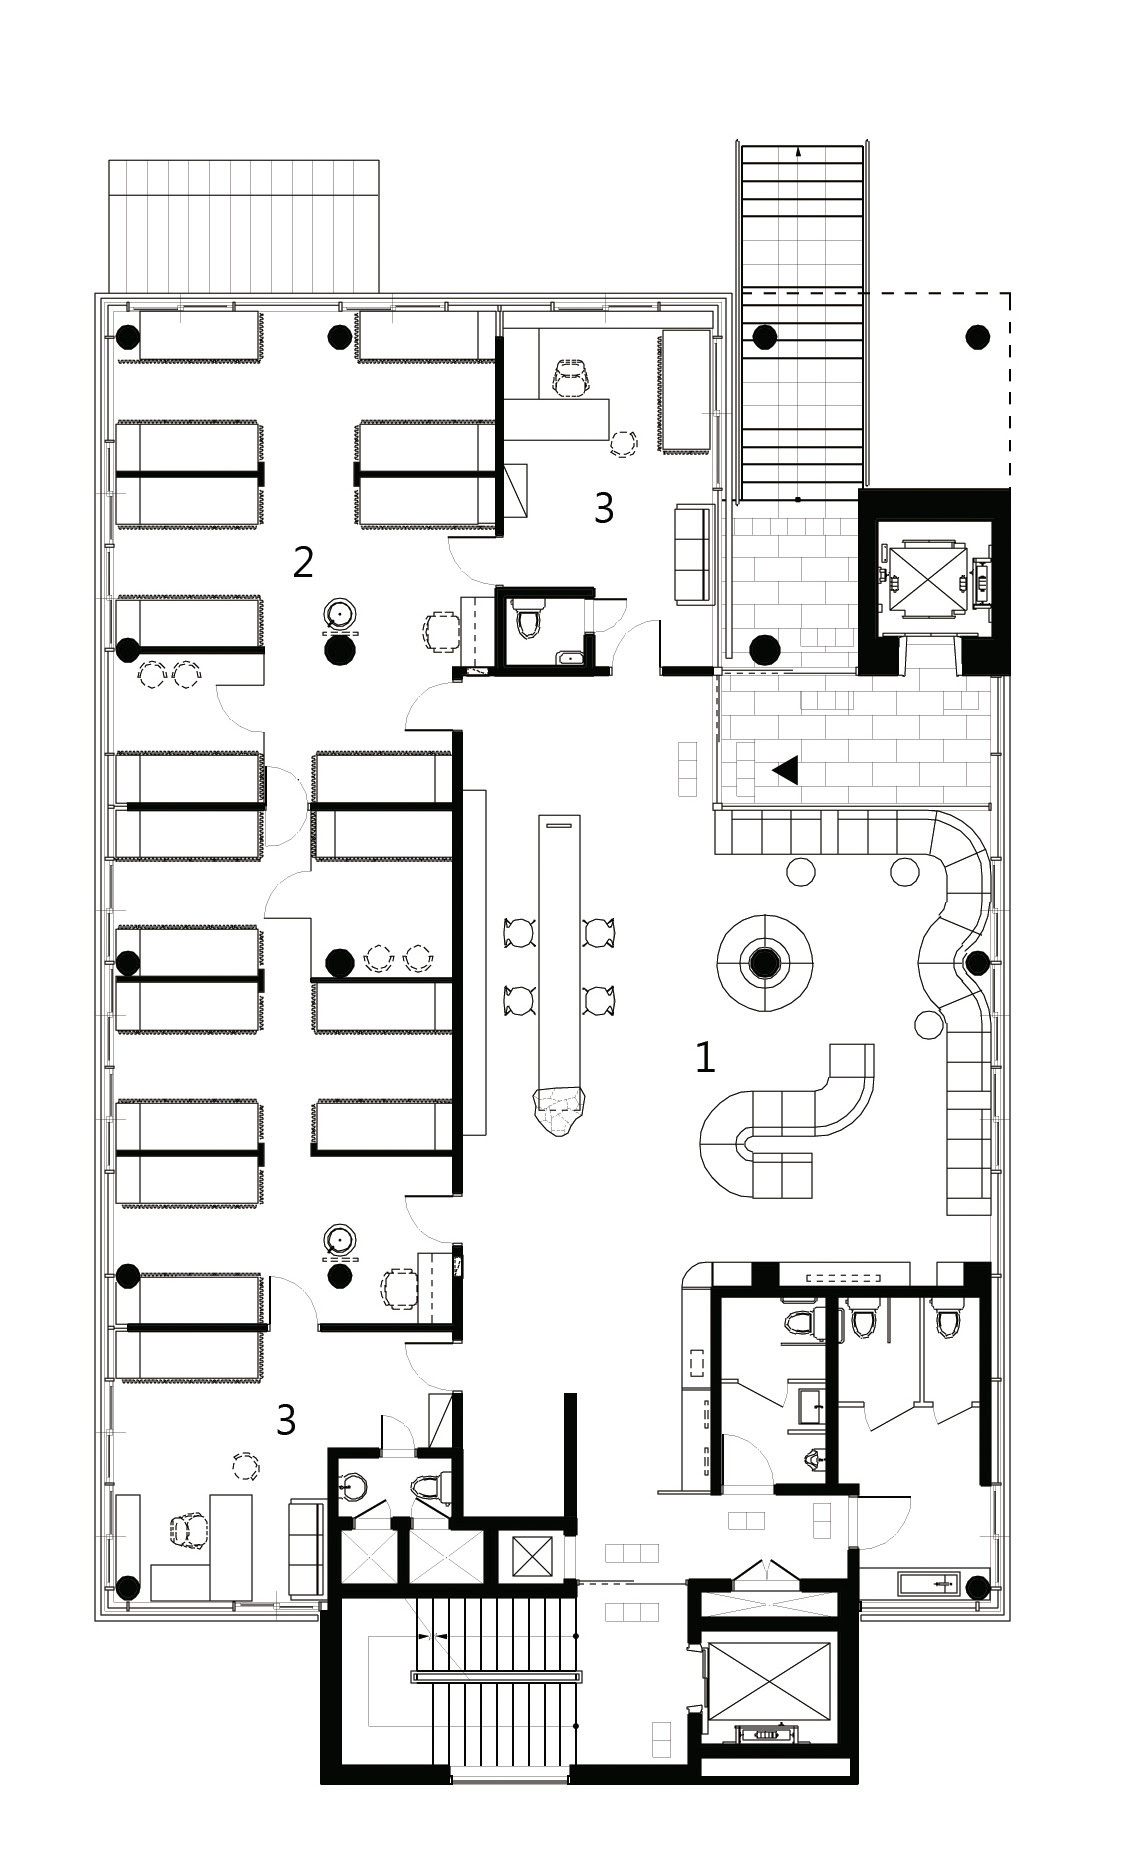 19 Awesome Veterinary Practice Floor Plans